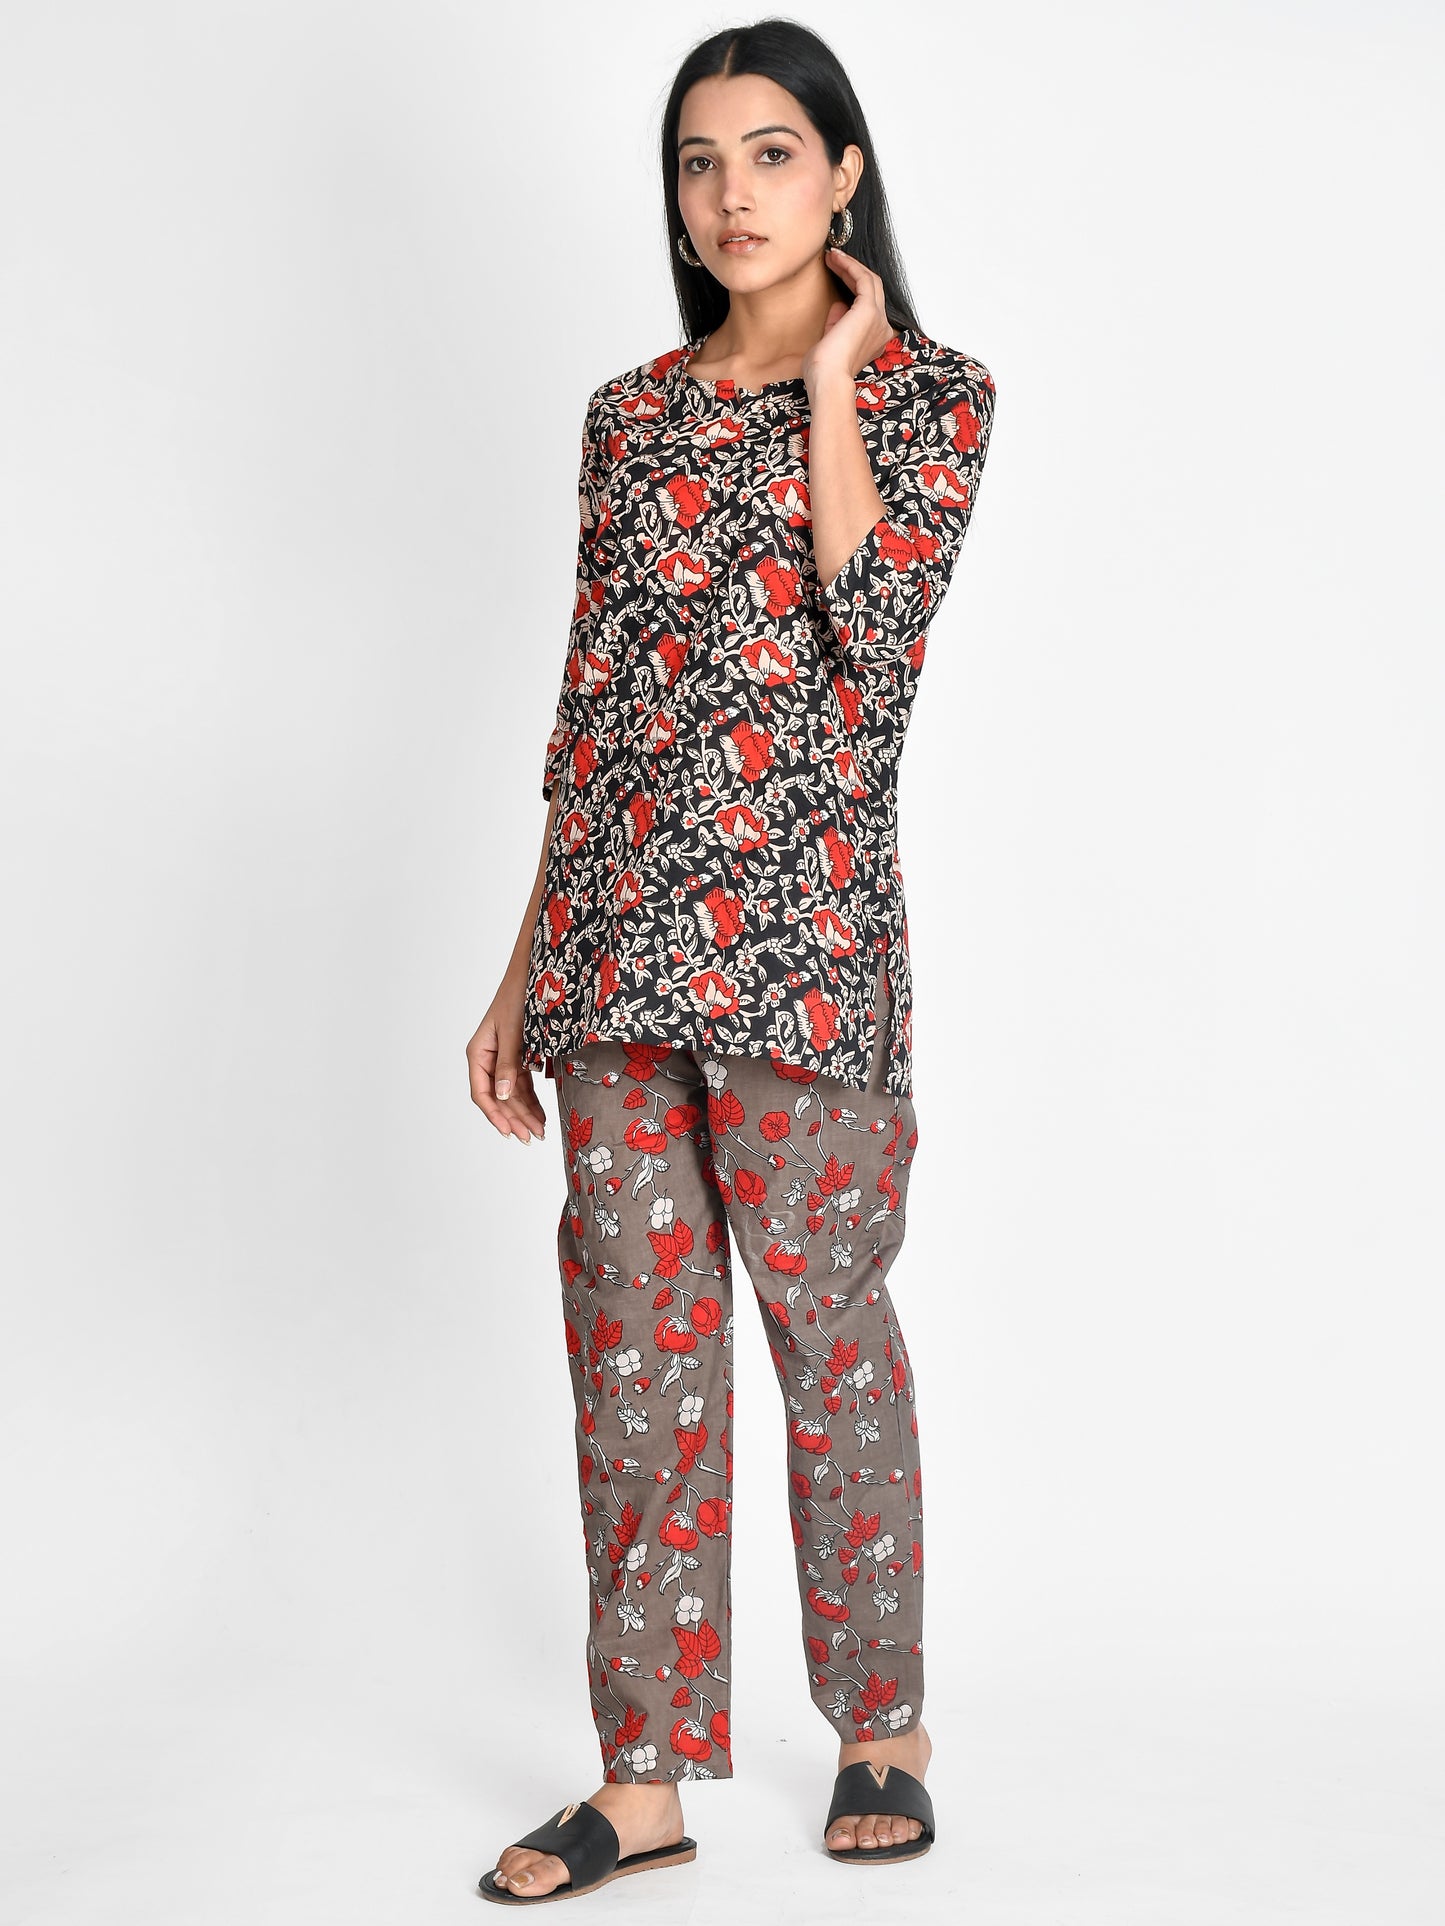 Experience ultimate comfort and style with our Pure Cotton printed Night suit for women and girls. Made with 100% pure cotton material, our night suit guarantees a soft and breathable feeling all night long. The stylish prints add a touch of elegance to your loungewear collec